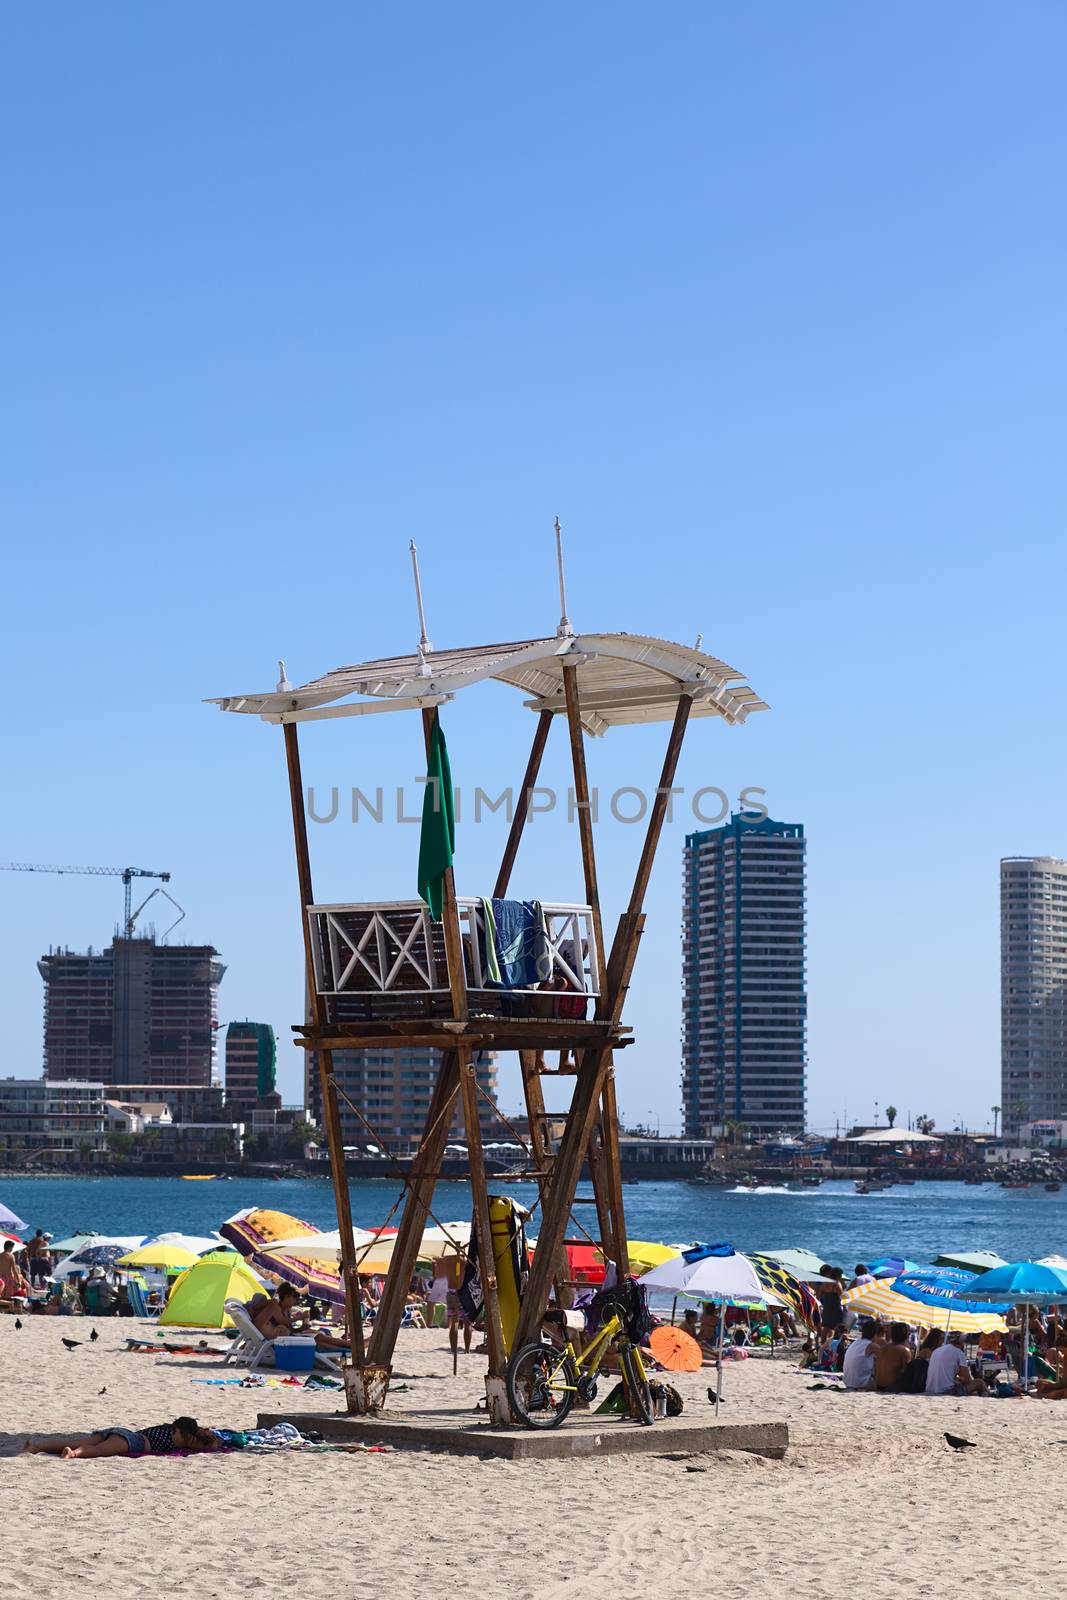 IQUIQUE, CHILE - JANUARY 23, 2015: Lifeguard watchtower on Cavancha beach with modern buildings in the back on a peninsula on January 23, 2015 in Iquique, Chile. Iquique is a free port city in Northern Chile. (Selective Focus, Focus on the watchtower)